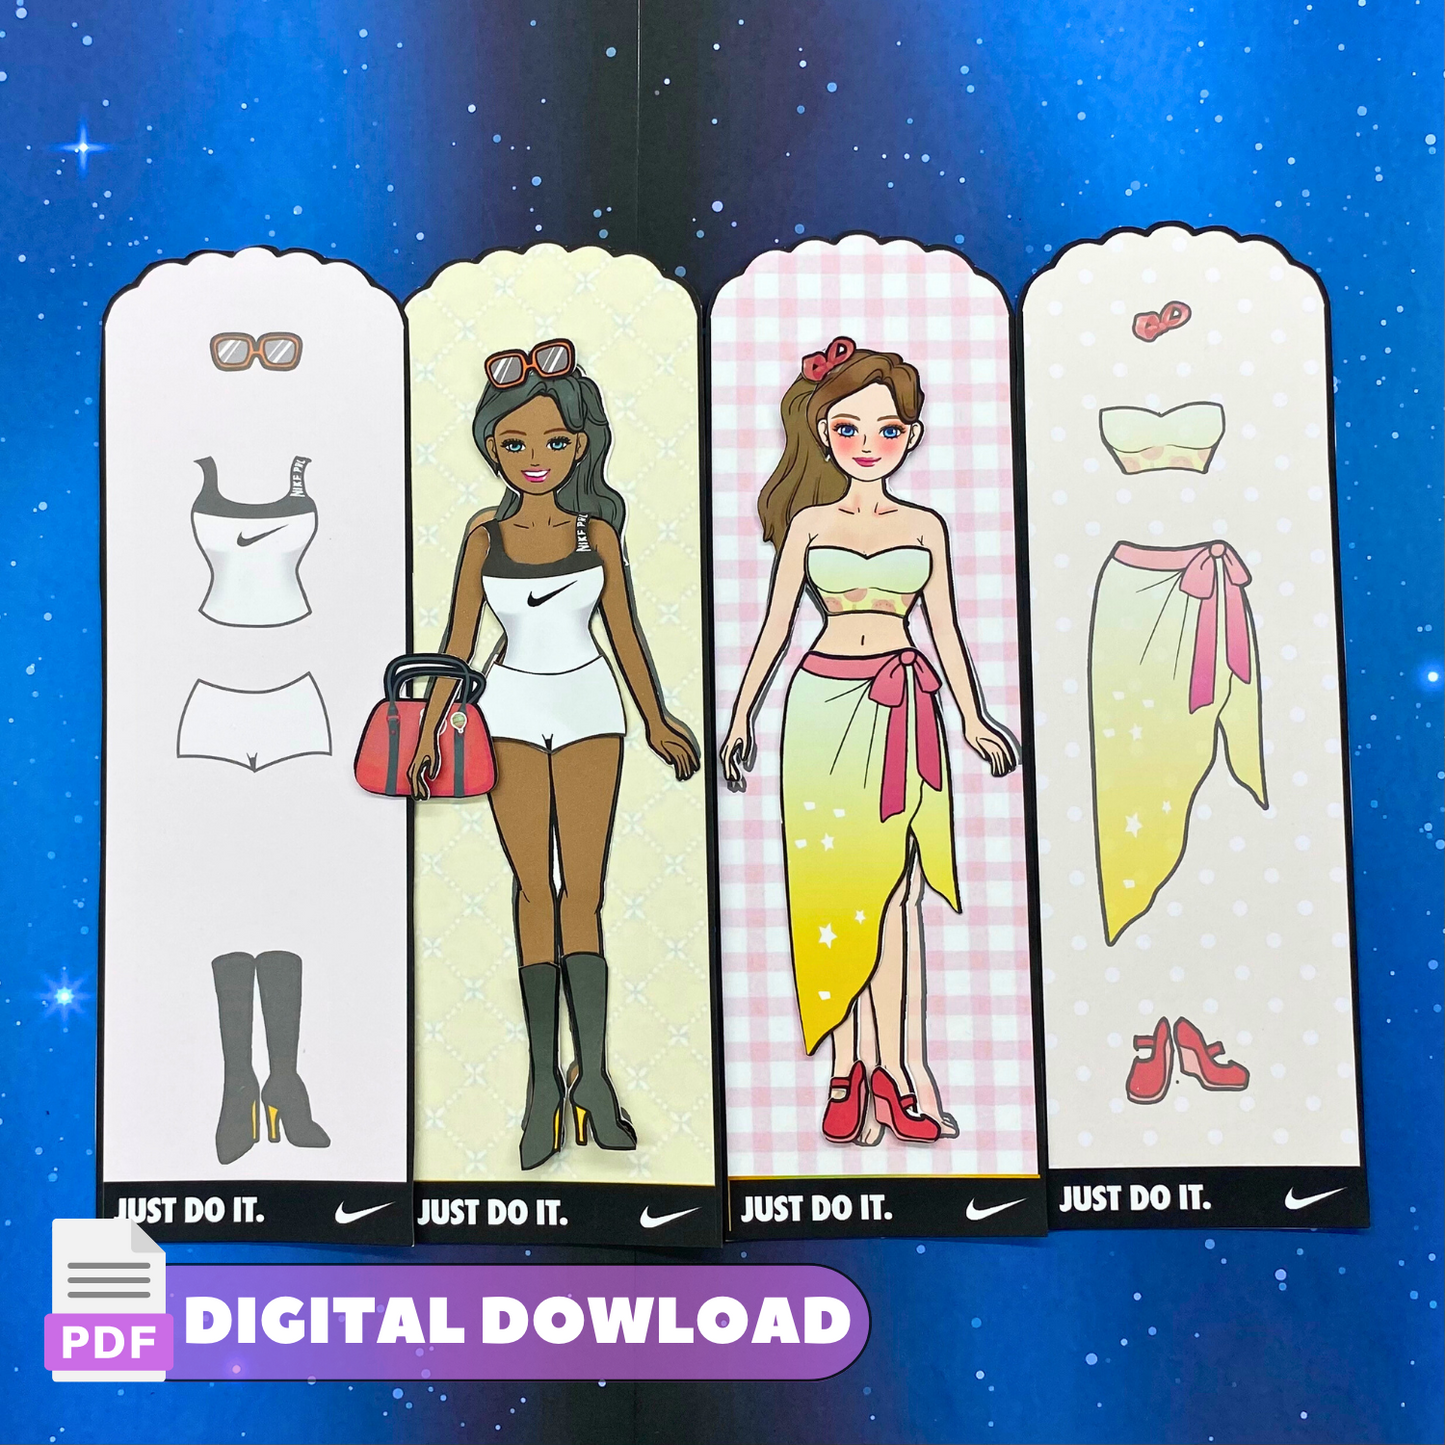 Printable Paper Dolls Dress up Kit 🌈 Sporty Outfits in Fabulous Envelope | Fashion games | Montessori toy | DIY, Instant Download 🌈 Woa Doll Crafts